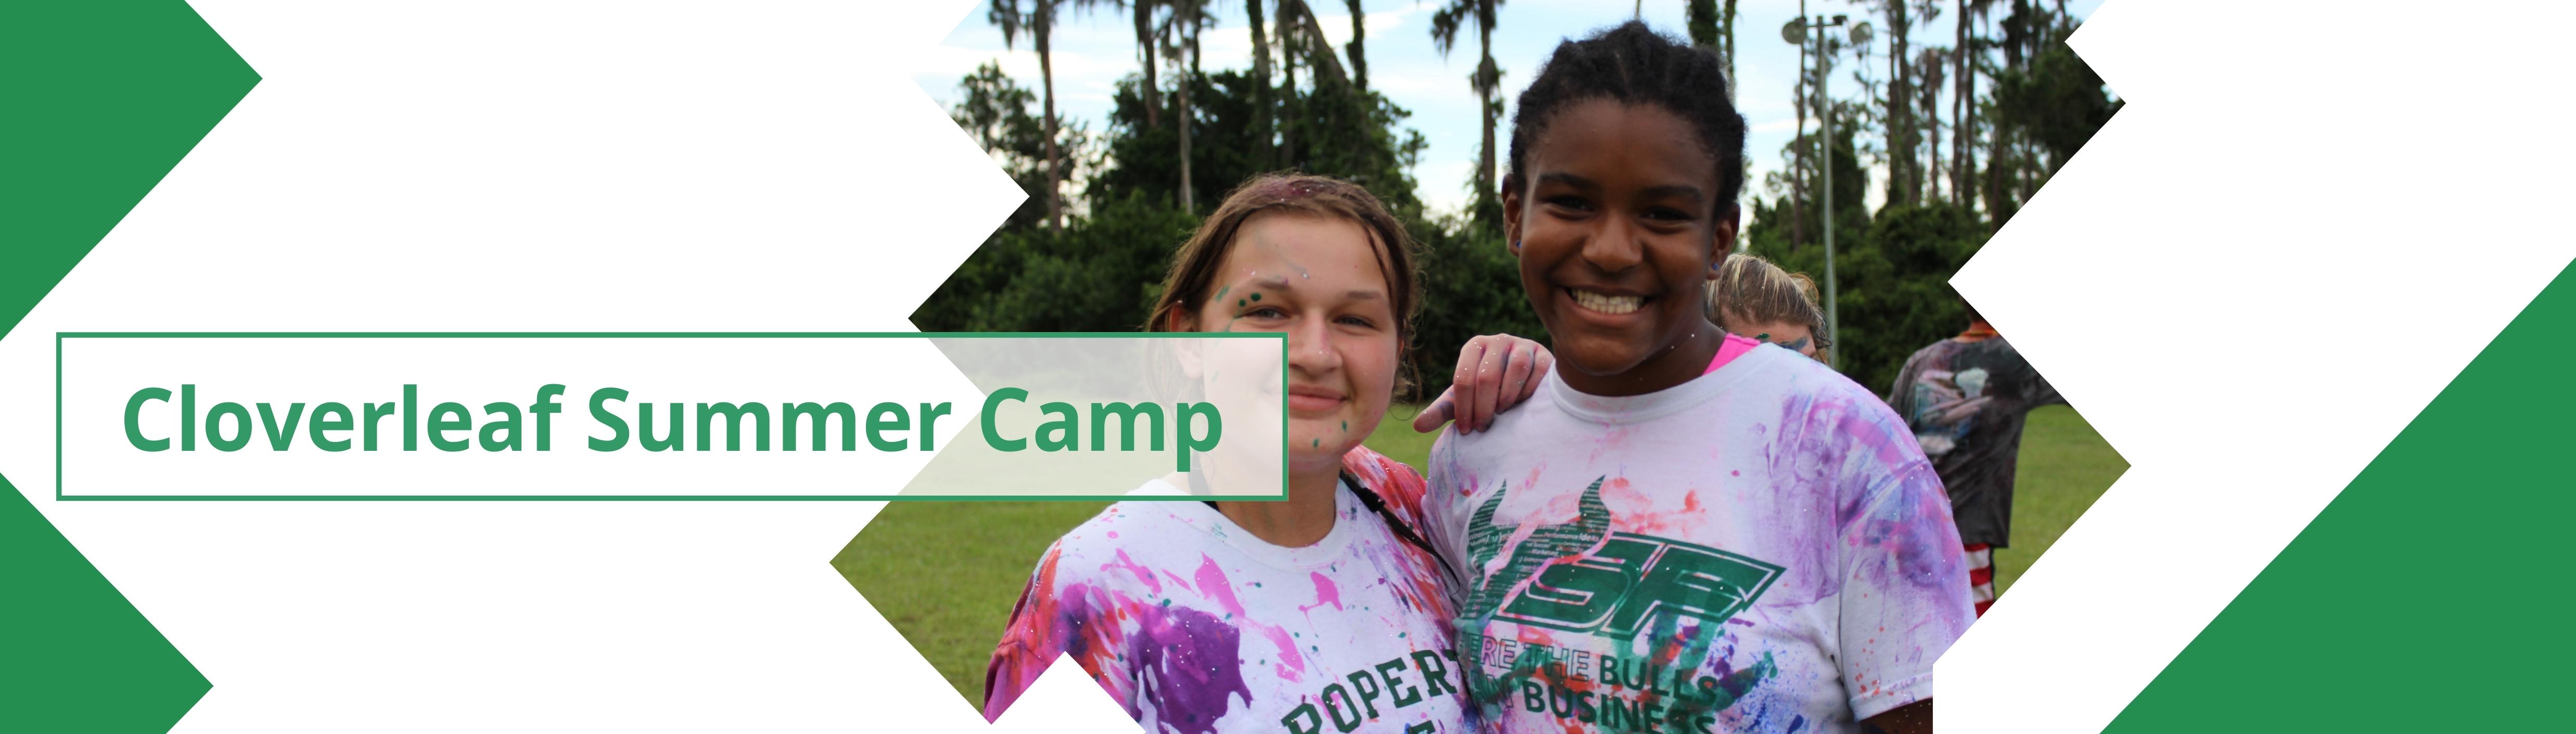 banner graphic of 2 youth at camp cloverleaf